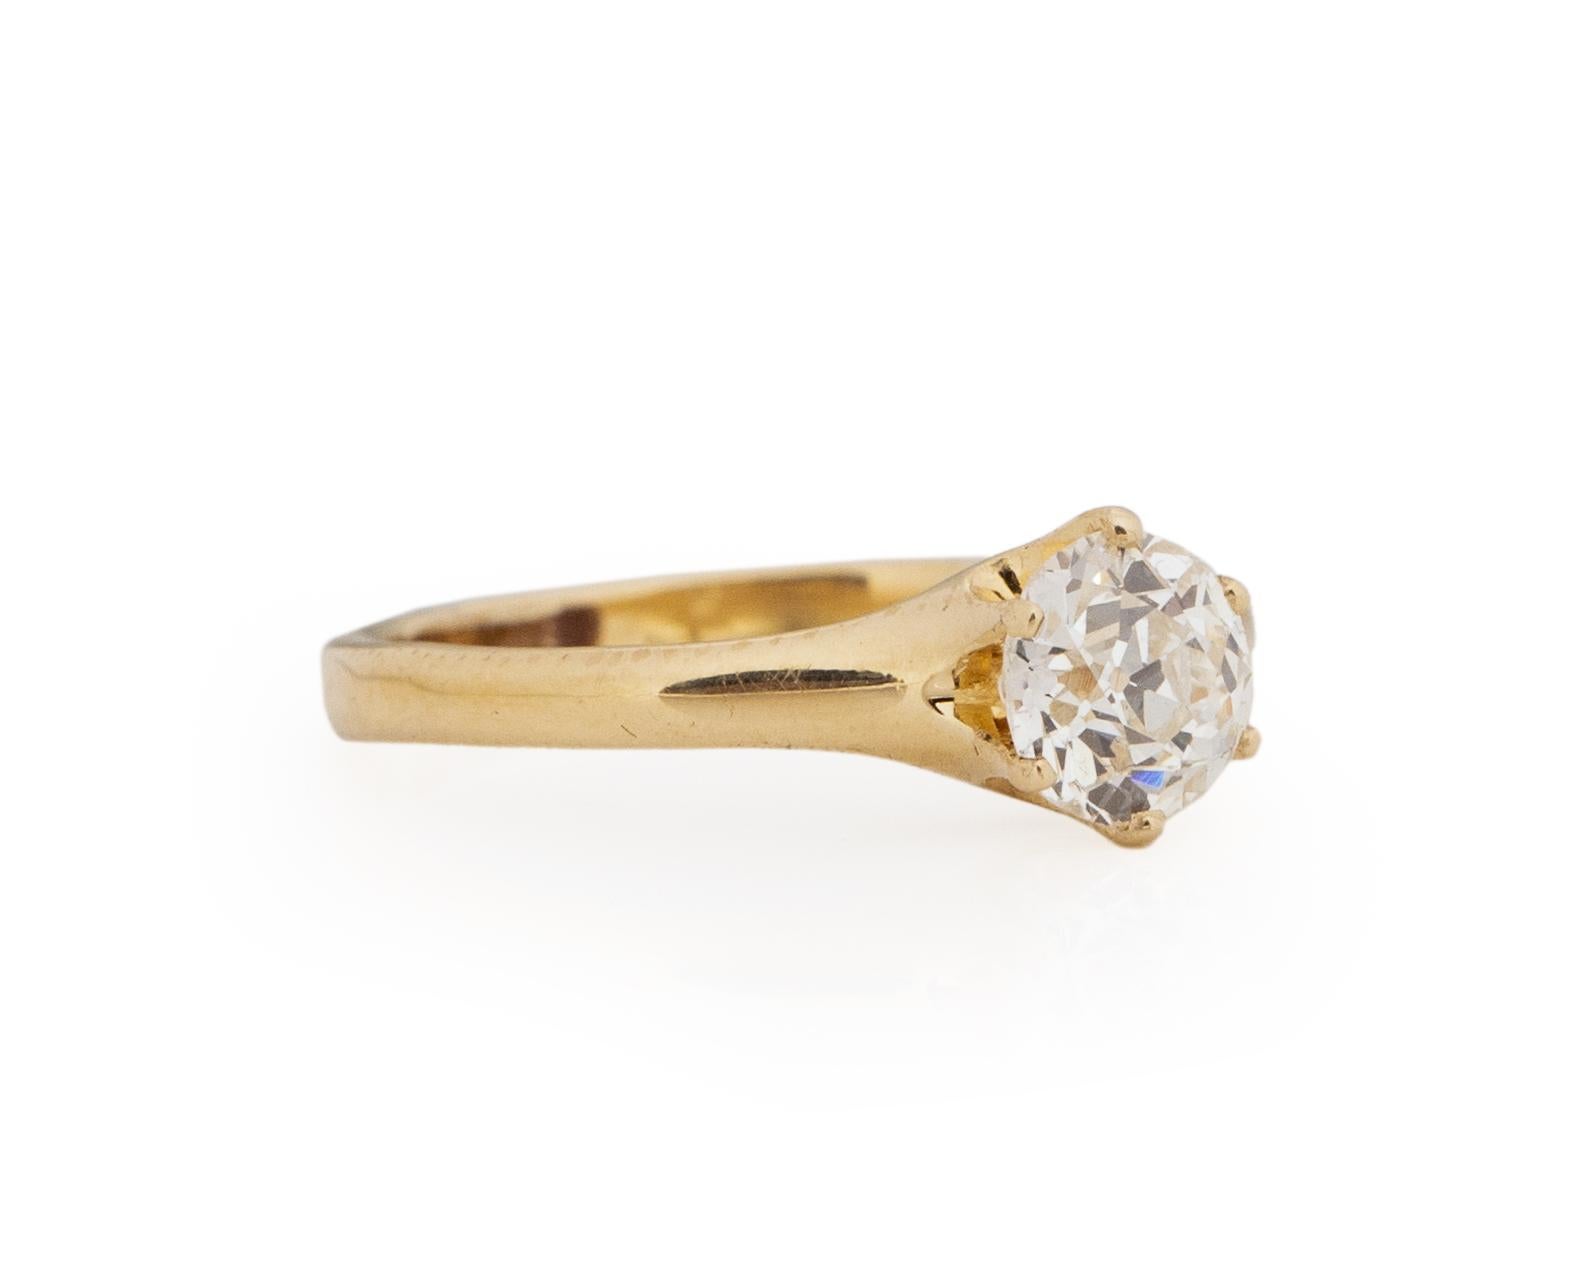 Ring Size: 4.75
Metal Type: 14karat Yellow Gold [Hallmarked, and Tested]
Weight: 2.0 grams

Center Diamond Details:
GIA REPORT #: 5211864161
Weight: .70carat
Cut: Old European brilliant
Color: H
Clarity: SI1
Measurements: 5.72mm x 5.39mm x